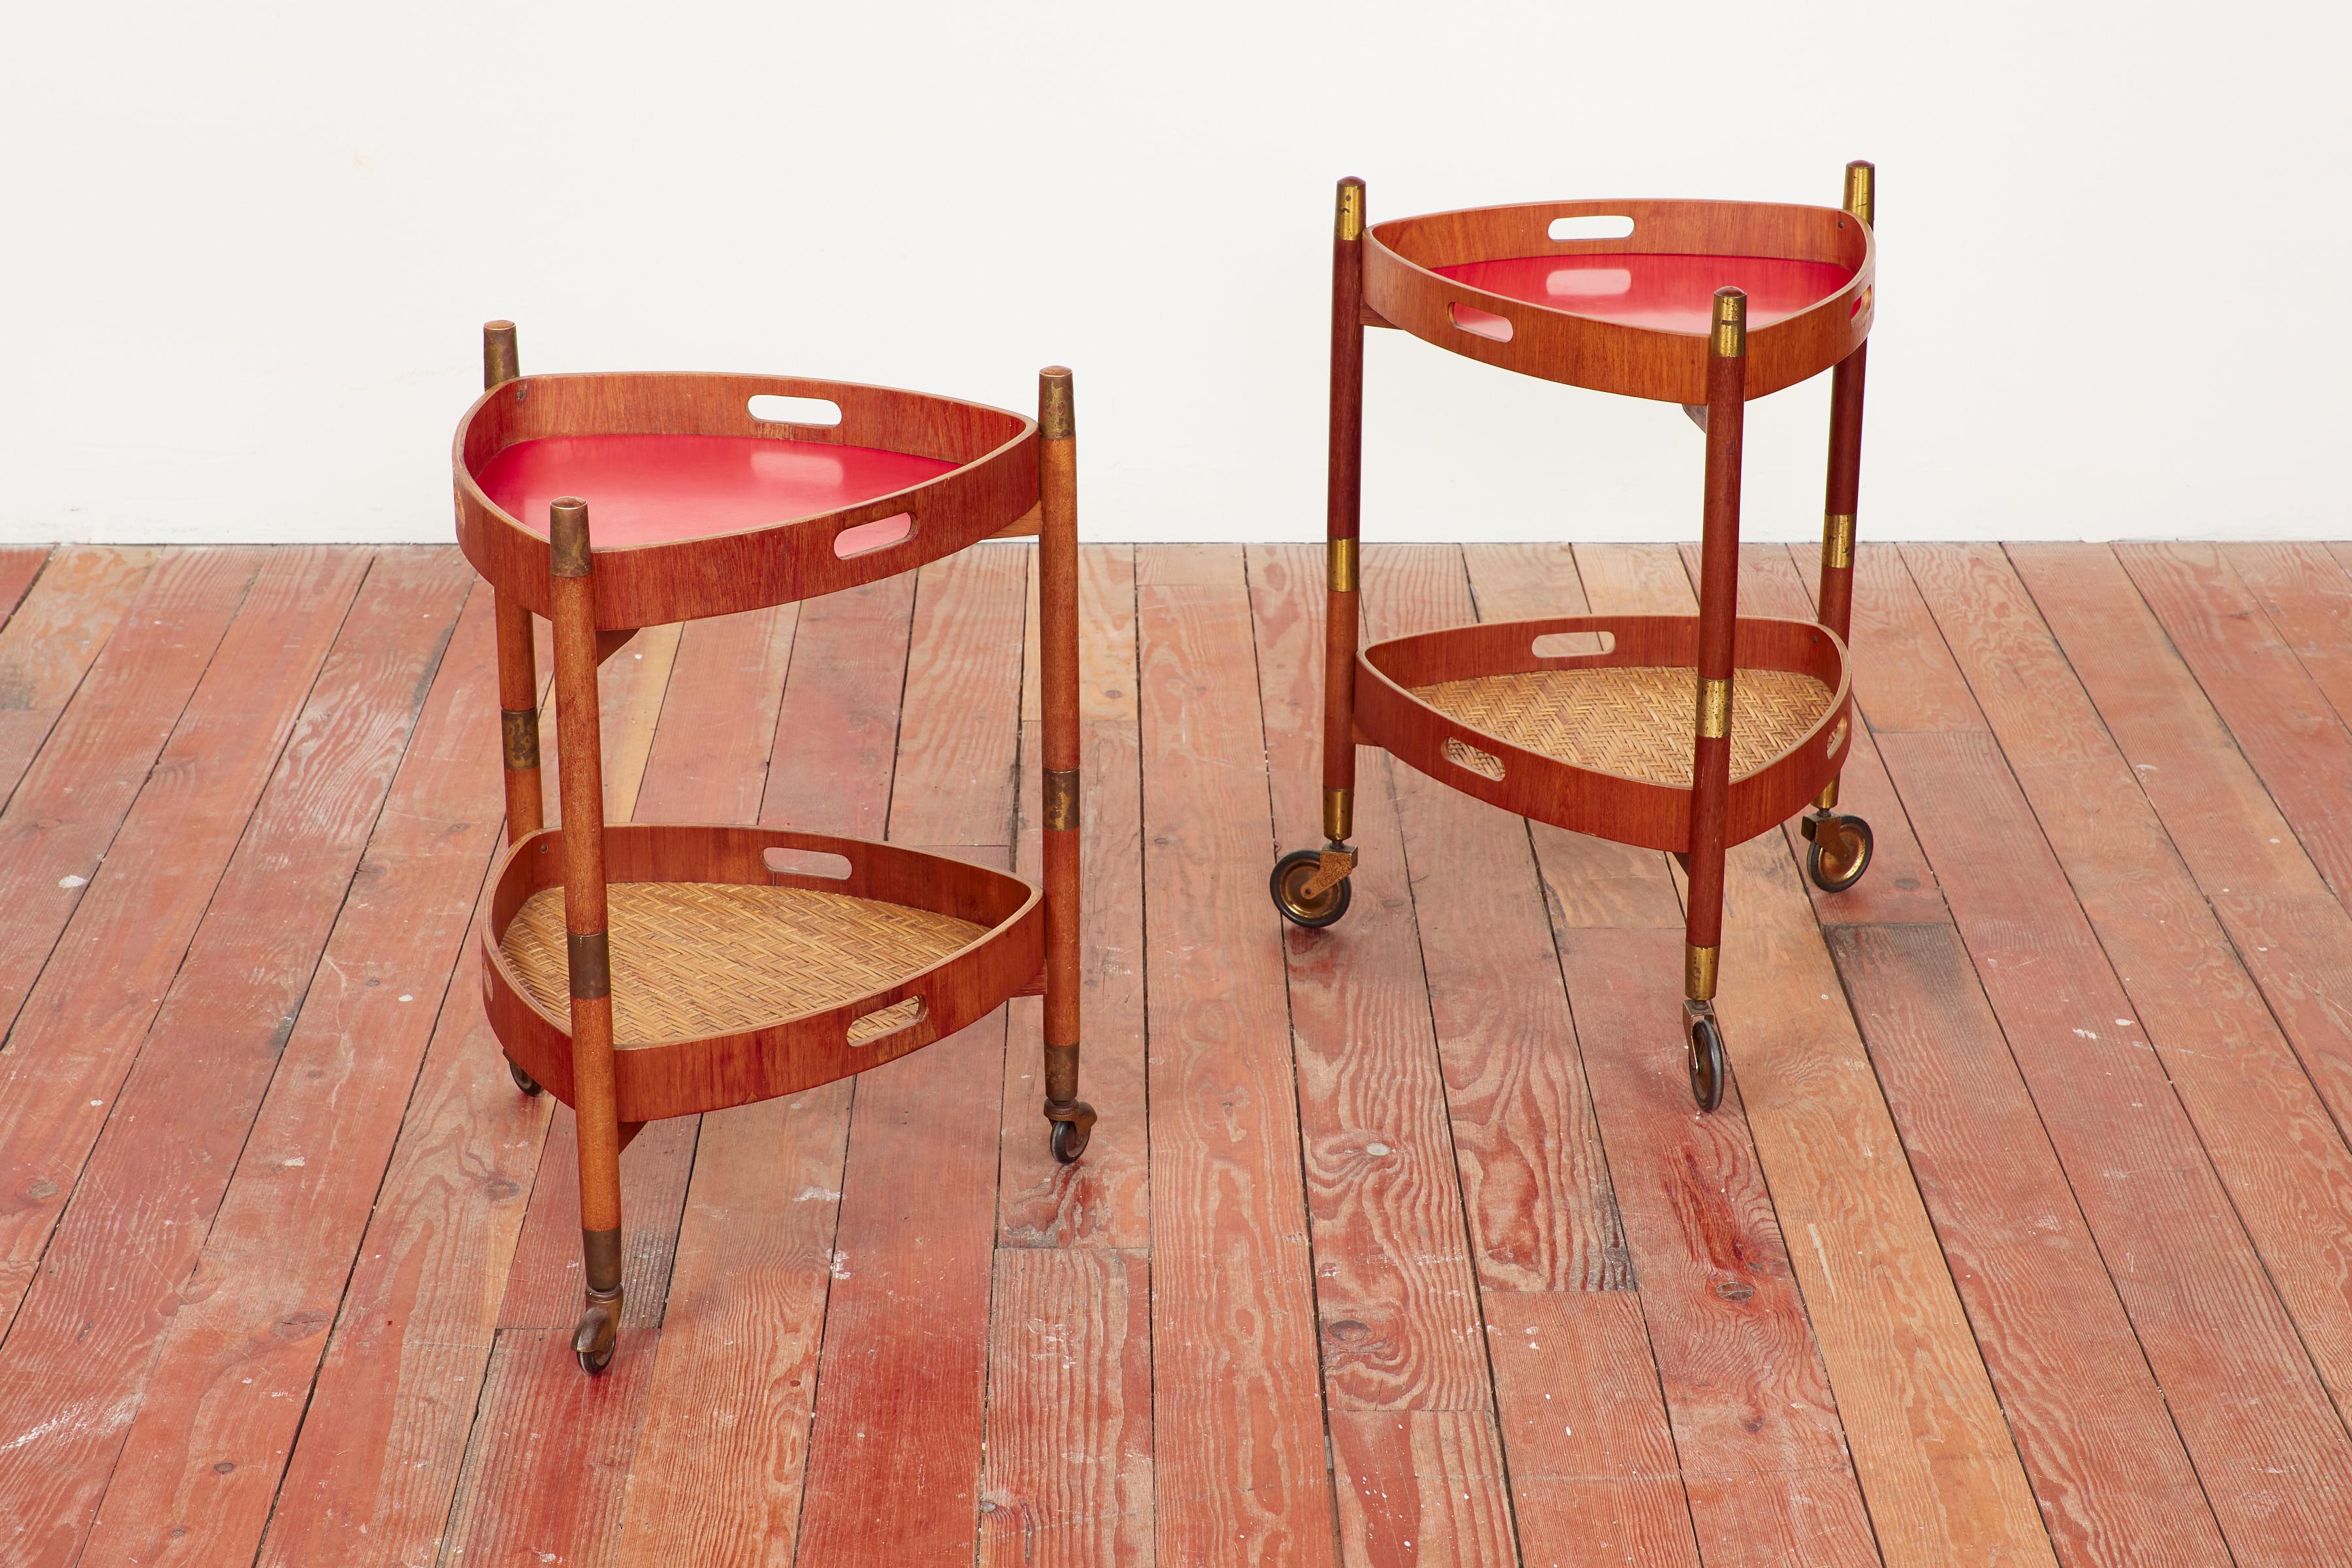 Pair of Italian wooden trolley barcarts with red laminate and woven bamboo trays, 1960s.
Top tray removes from bottom for serving purpose.

